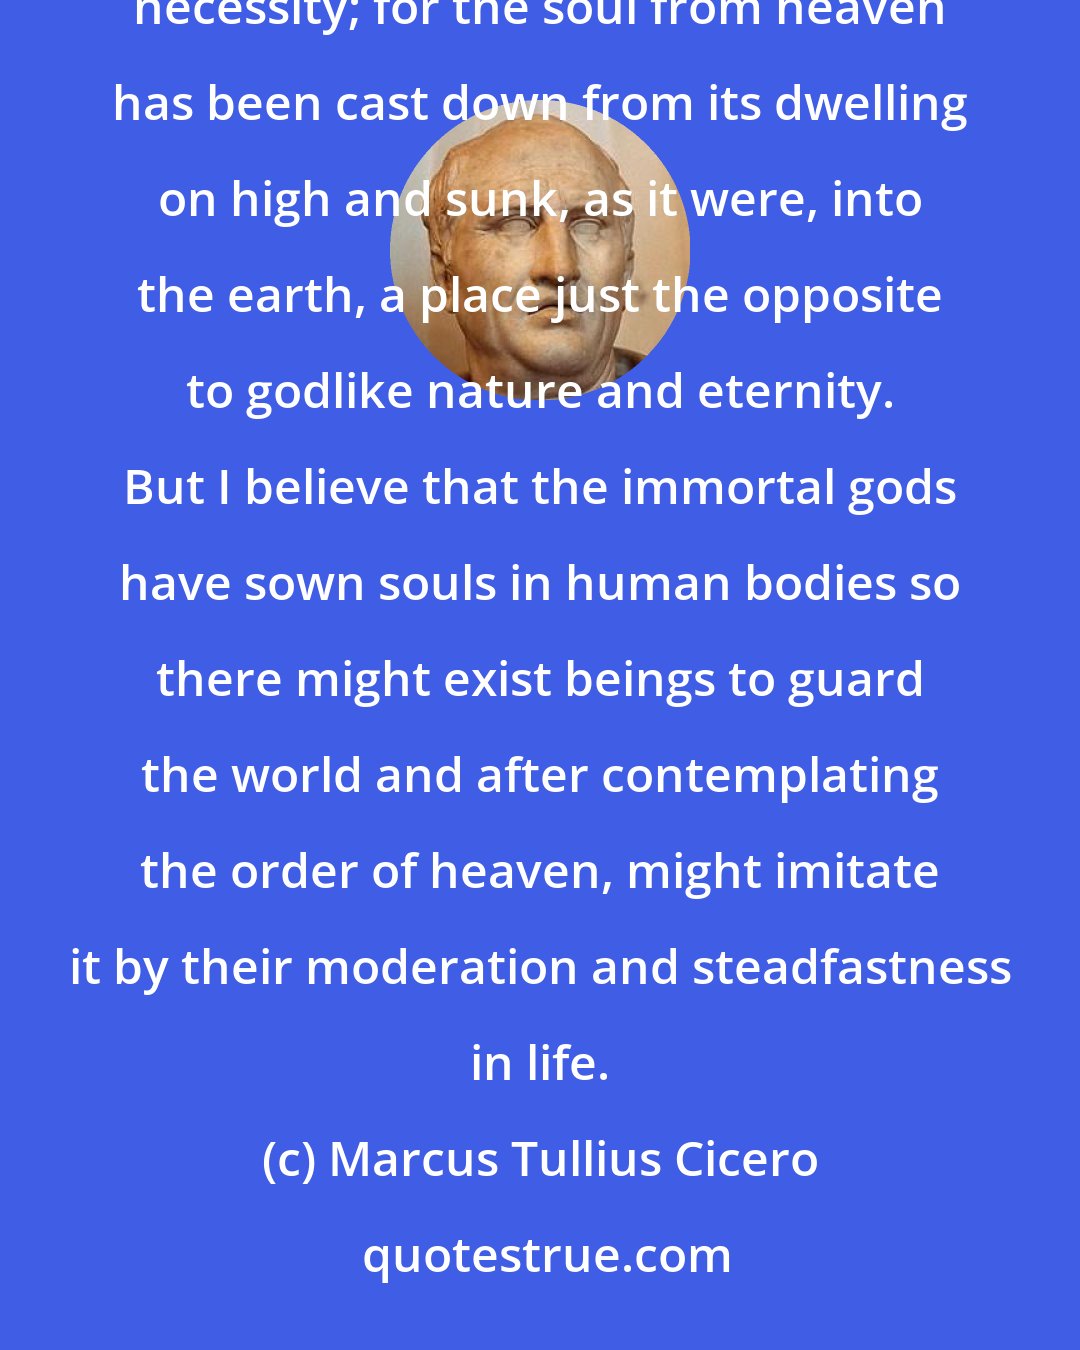 Marcus Tullius Cicero: For while we are enclosed in these confinements of the body, we perform as a kind of duty the heavy task of necessity; for the soul from heaven has been cast down from its dwelling on high and sunk, as it were, into the earth, a place just the opposite to godlike nature and eternity. But I believe that the immortal gods have sown souls in human bodies so there might exist beings to guard the world and after contemplating the order of heaven, might imitate it by their moderation and steadfastness in life.